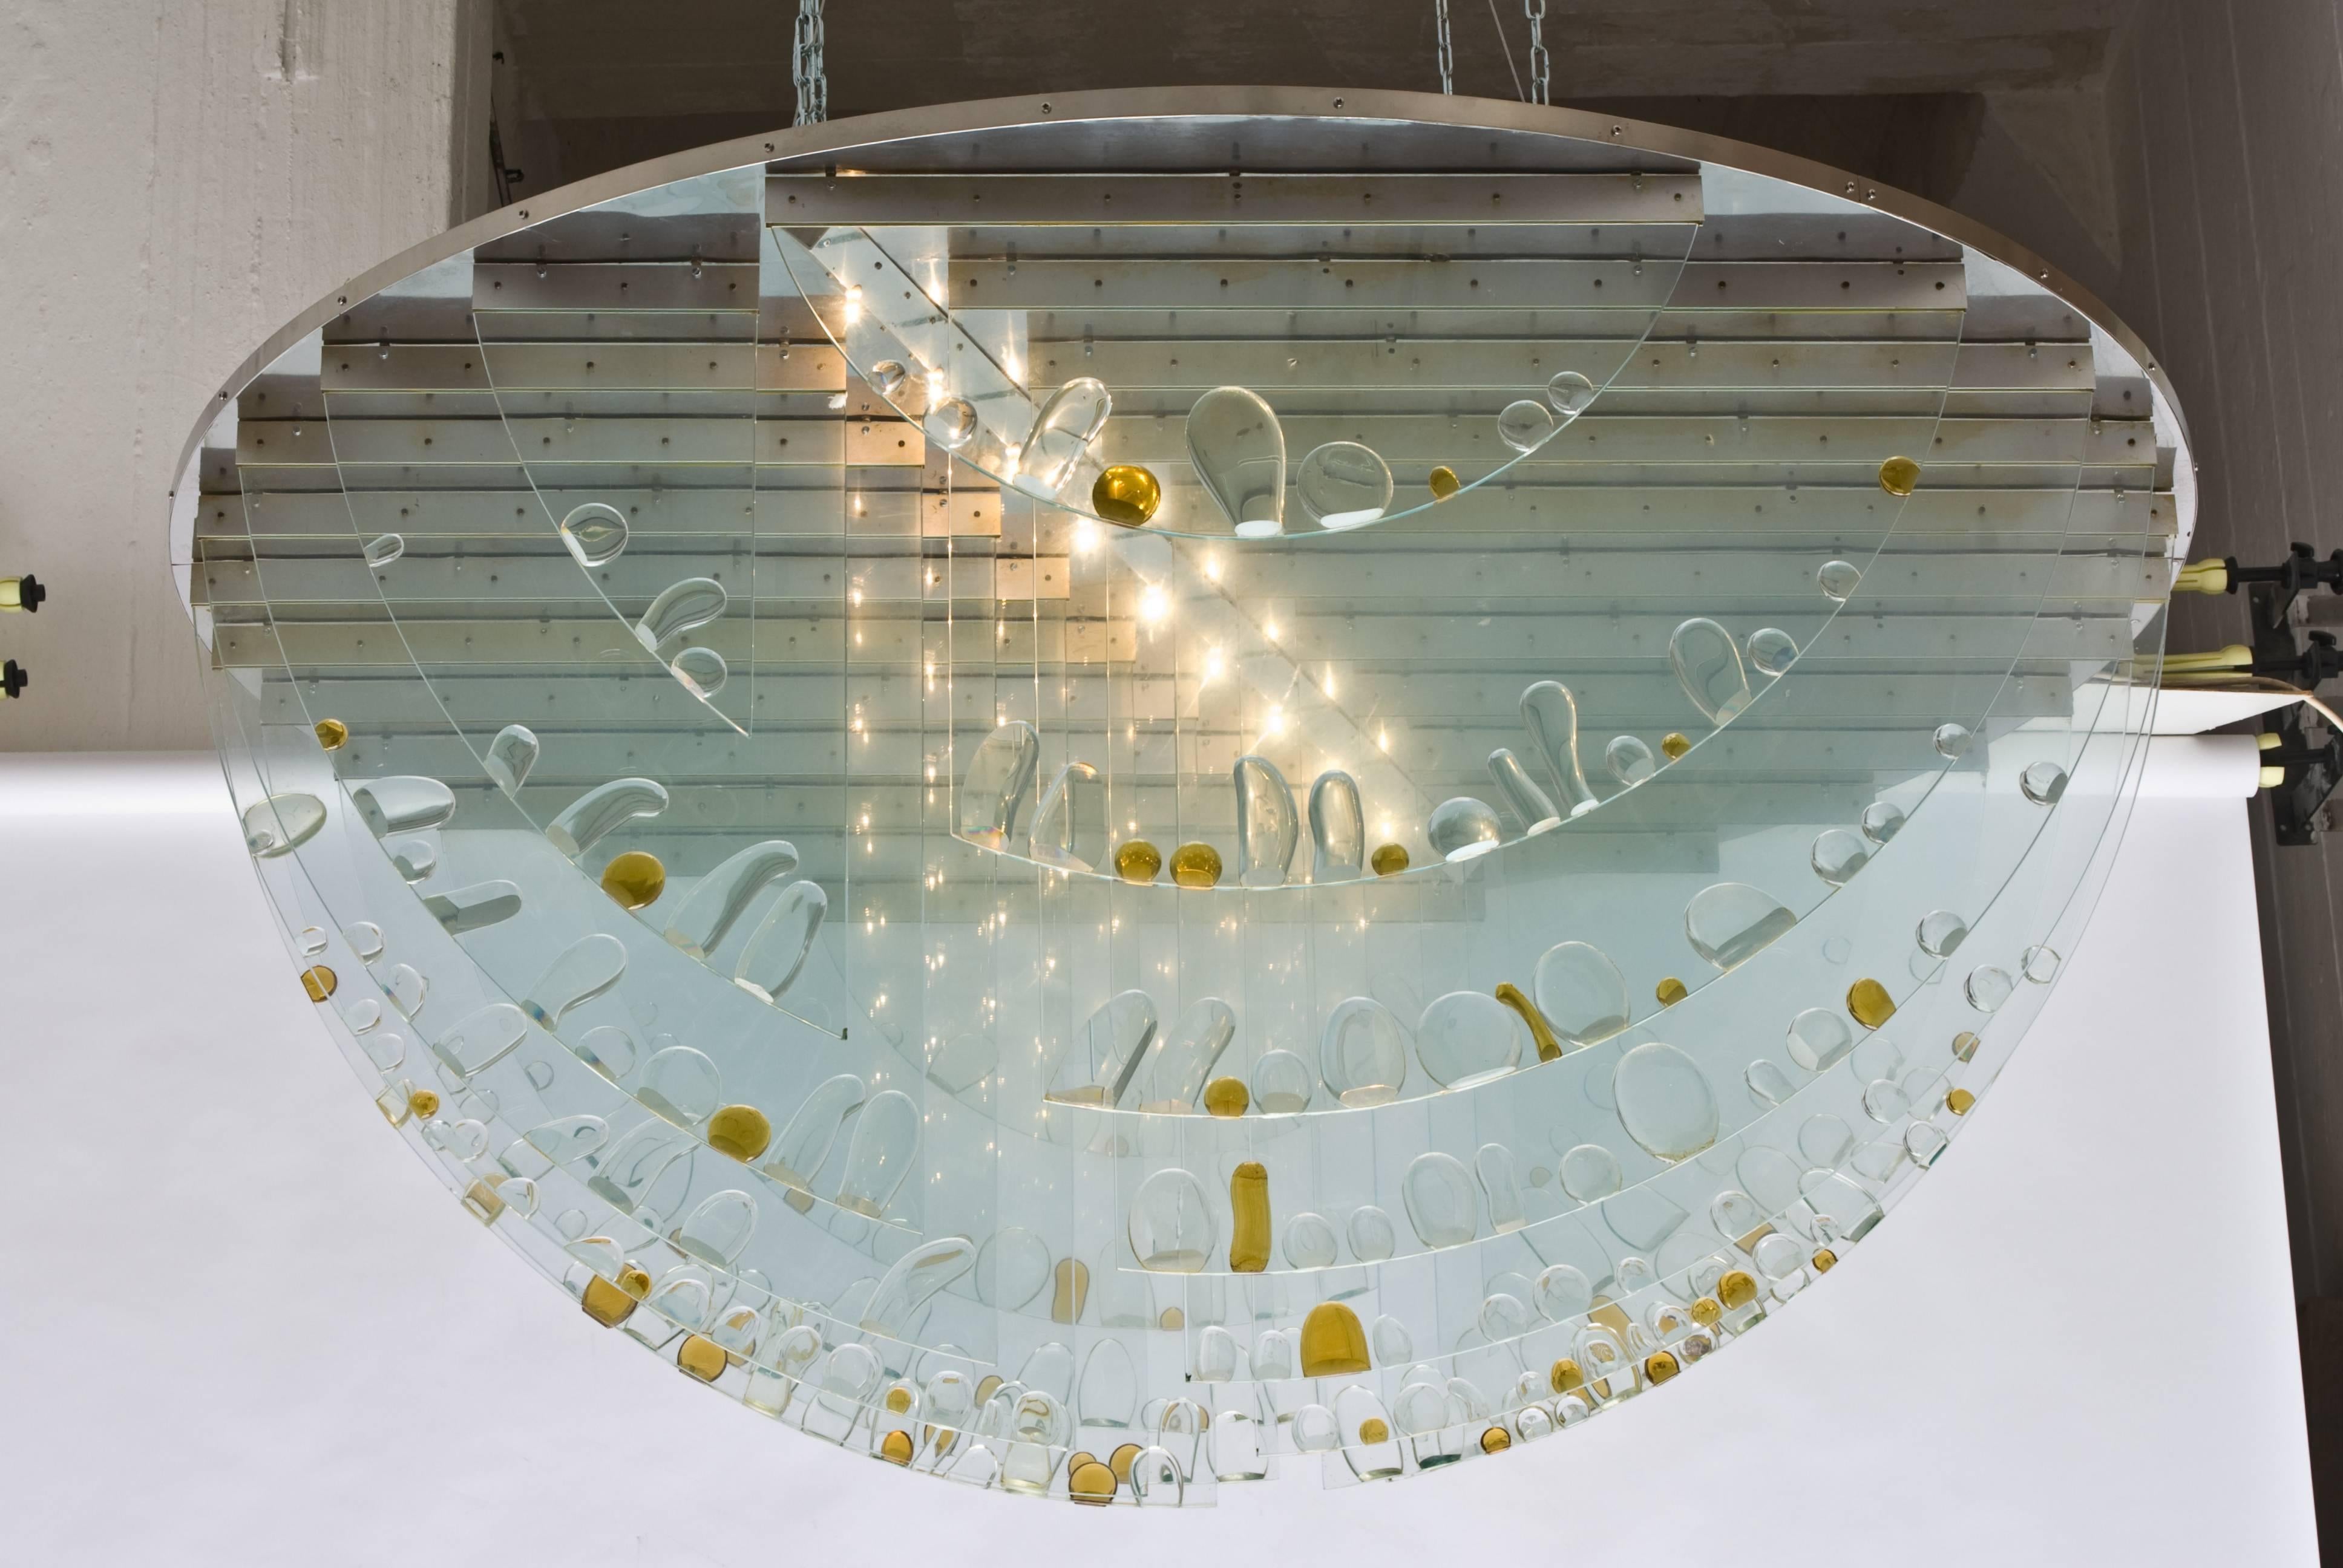 Exceptional very large ceiling light designed by Rene Roubicek for Hotel International Brno in the Czech Republic, circa 1960.

This unique lamp comes from the famous Hotel International Brno, which is one of the most important and best preserved